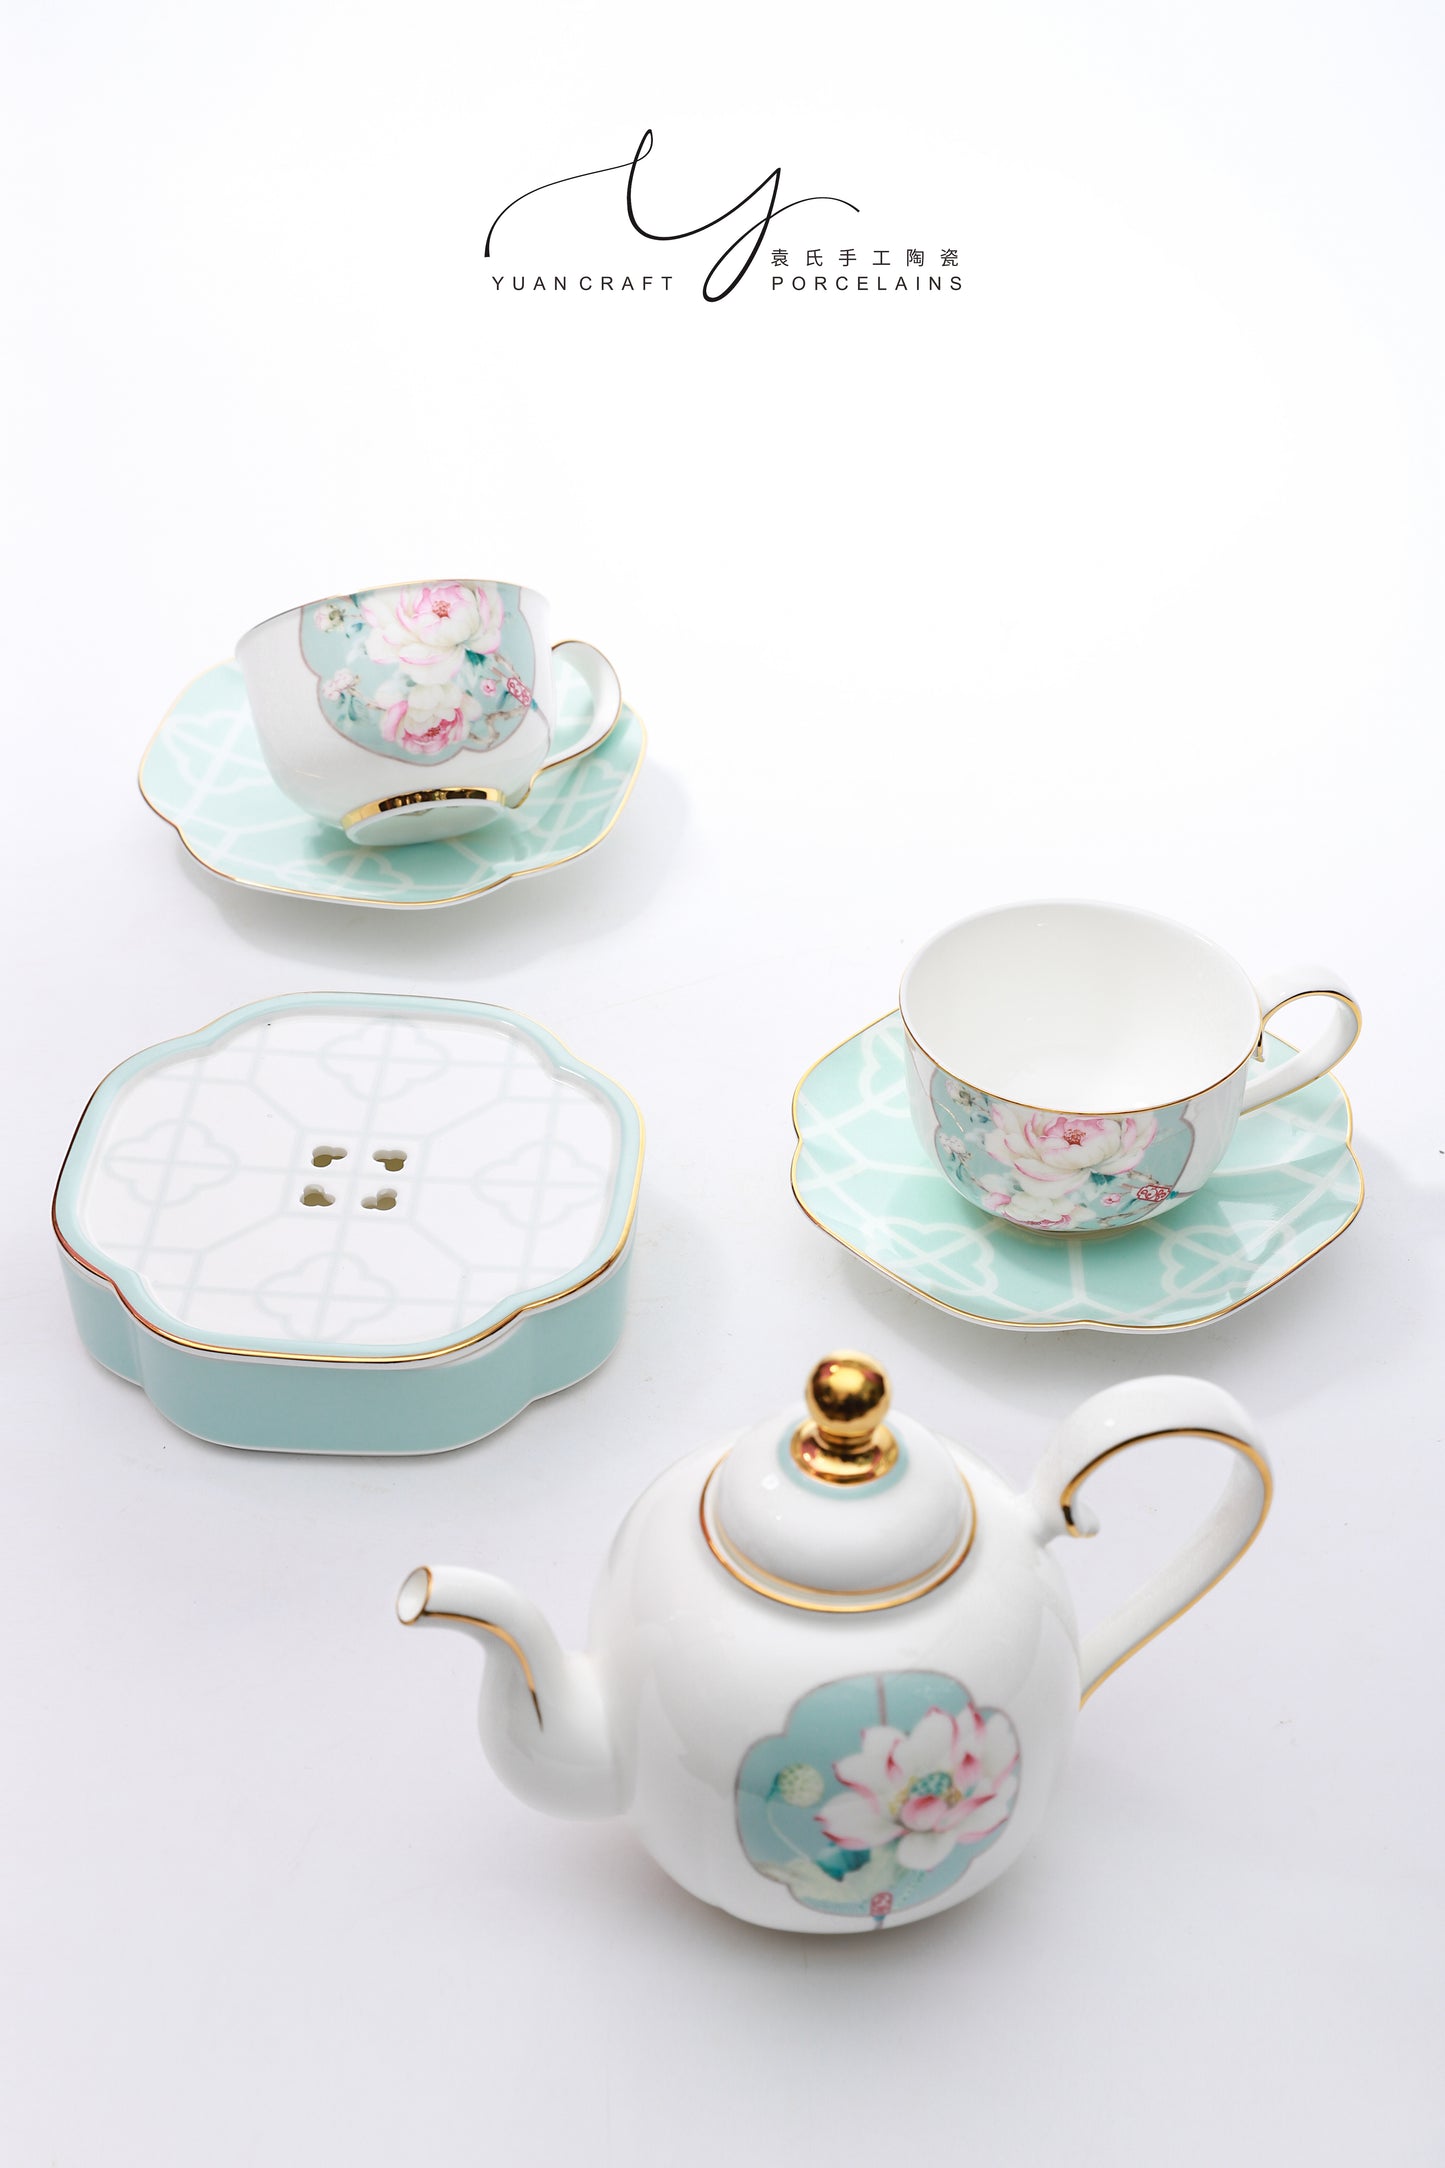 Jade Fan Lotus Flowers Tea Sets with 6 Pieces